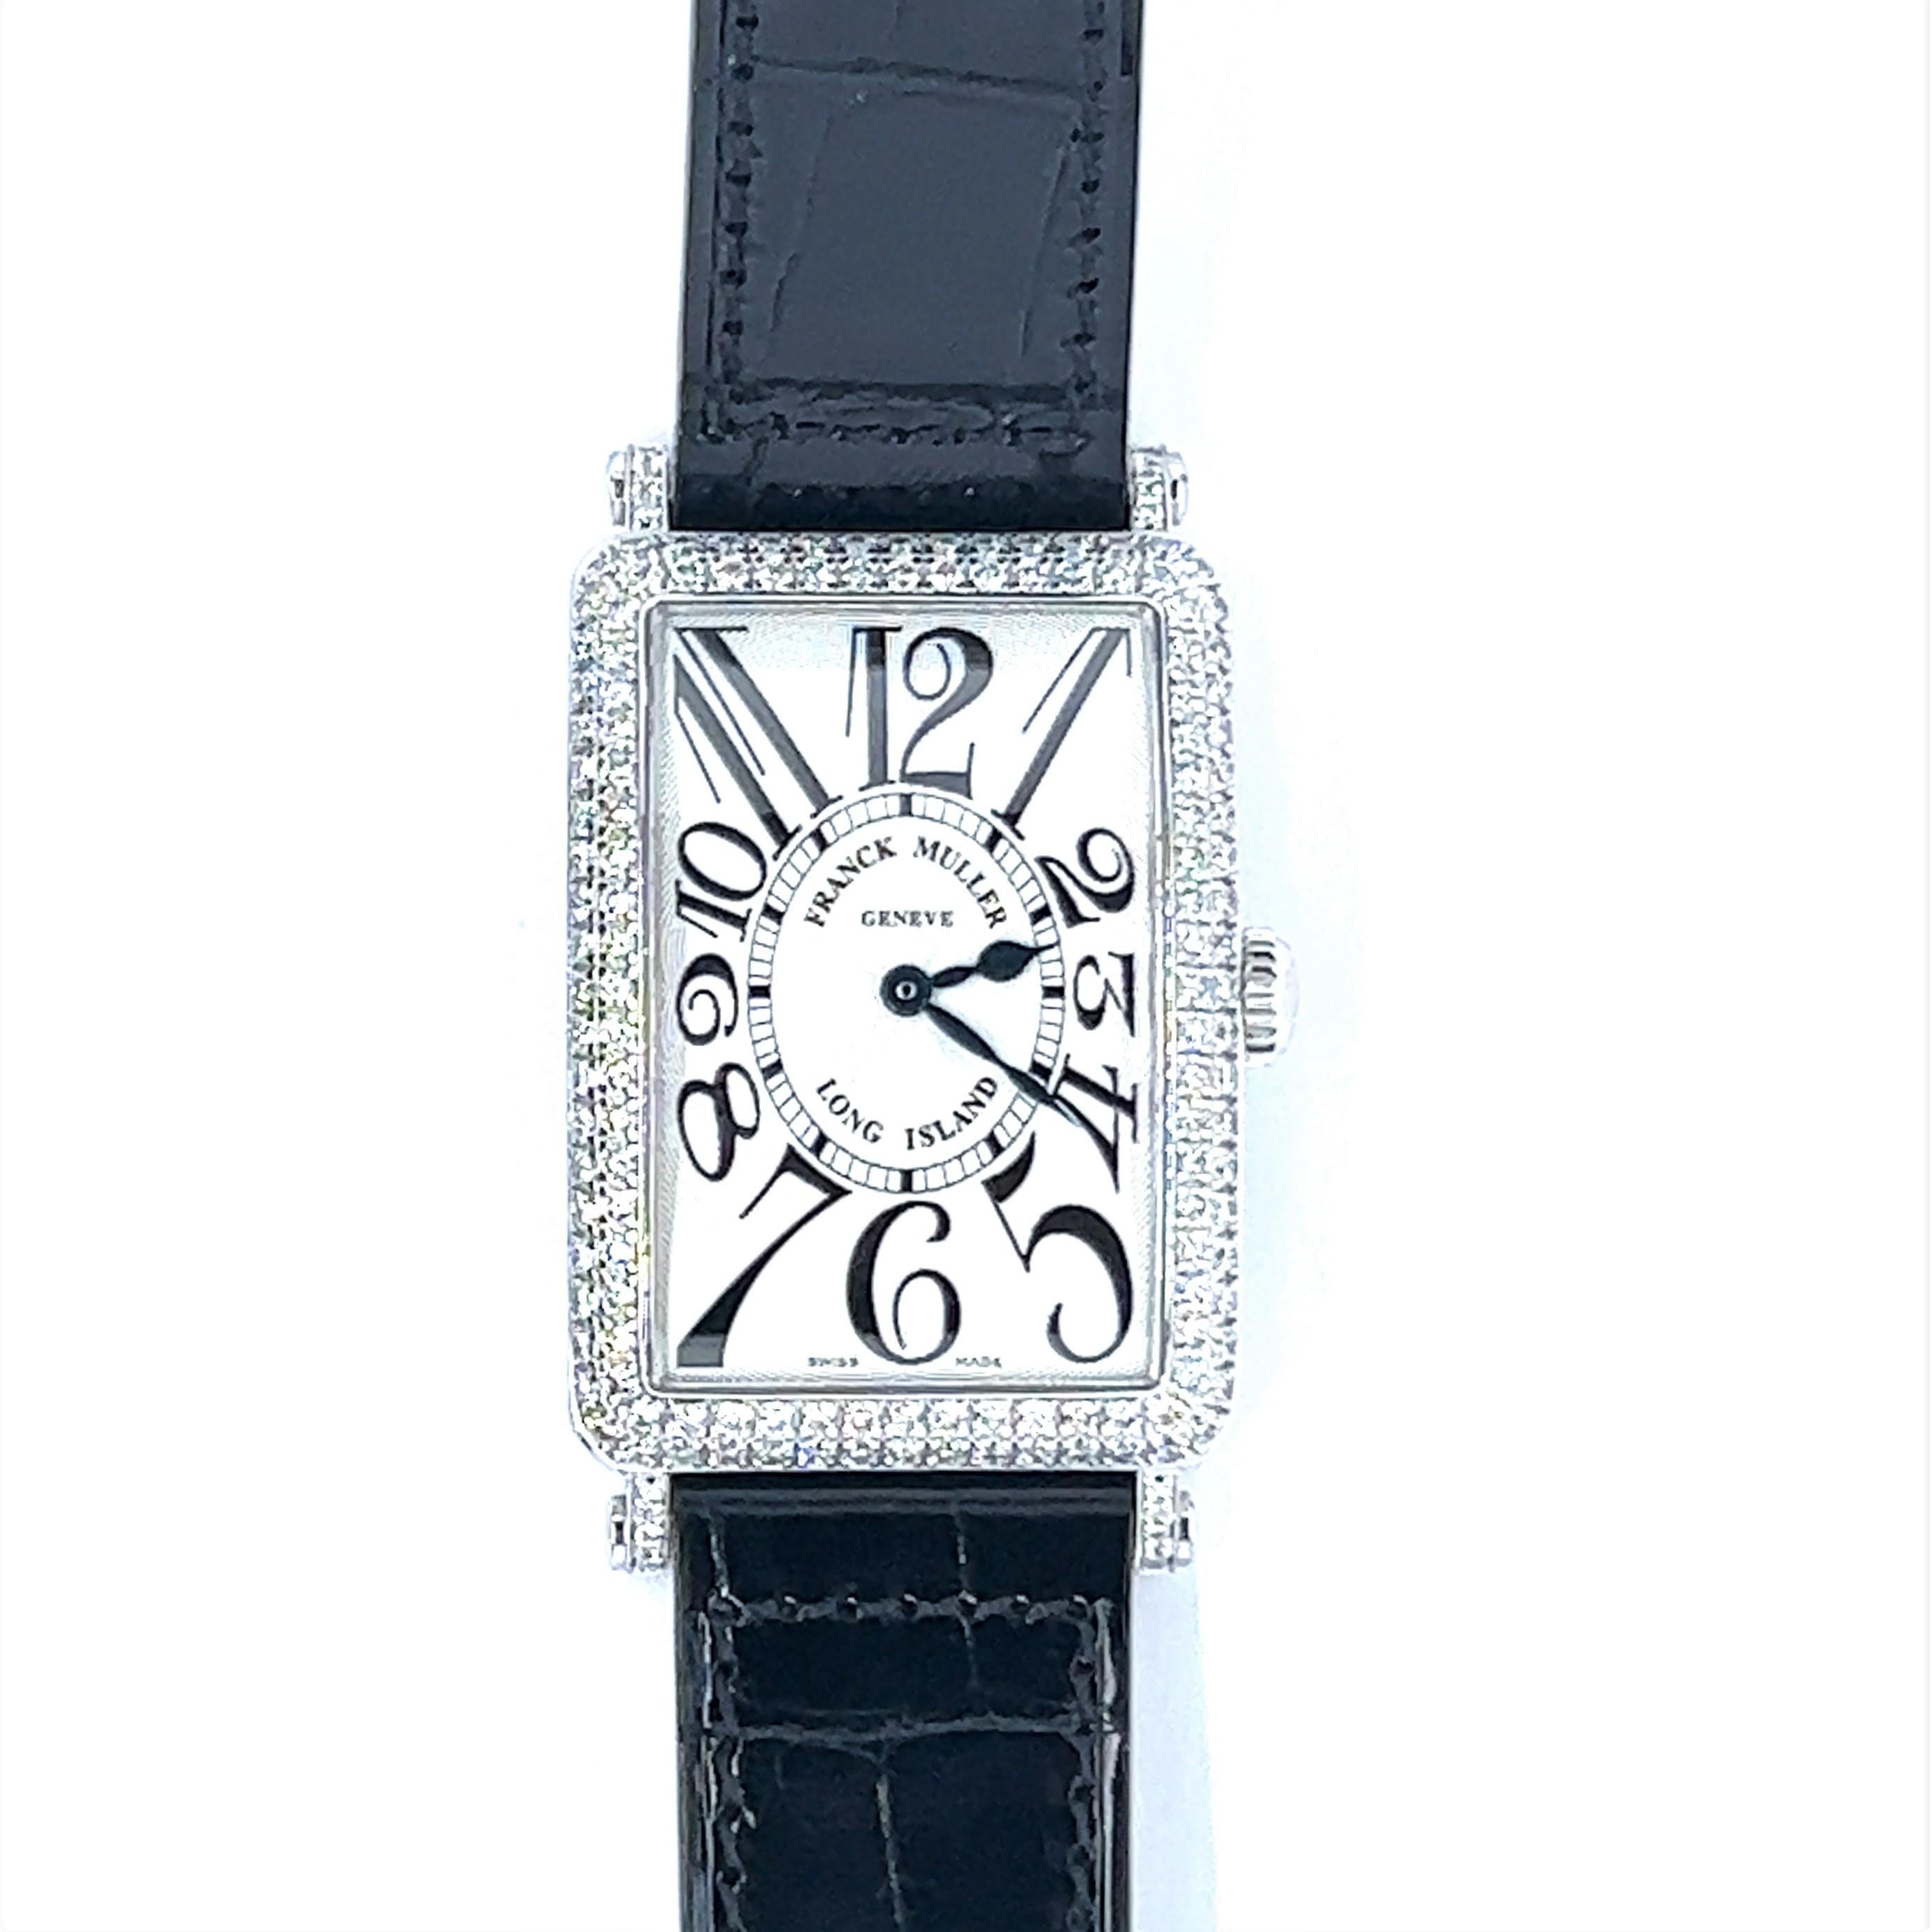 Franck Muller is a Swiss watchmaker founded in 1991 known for its exceptional artistry, innovative designs, and high-end timepieces. The brand has gained recognition for its unique and complex watch movements and avant-garde designs. It combines